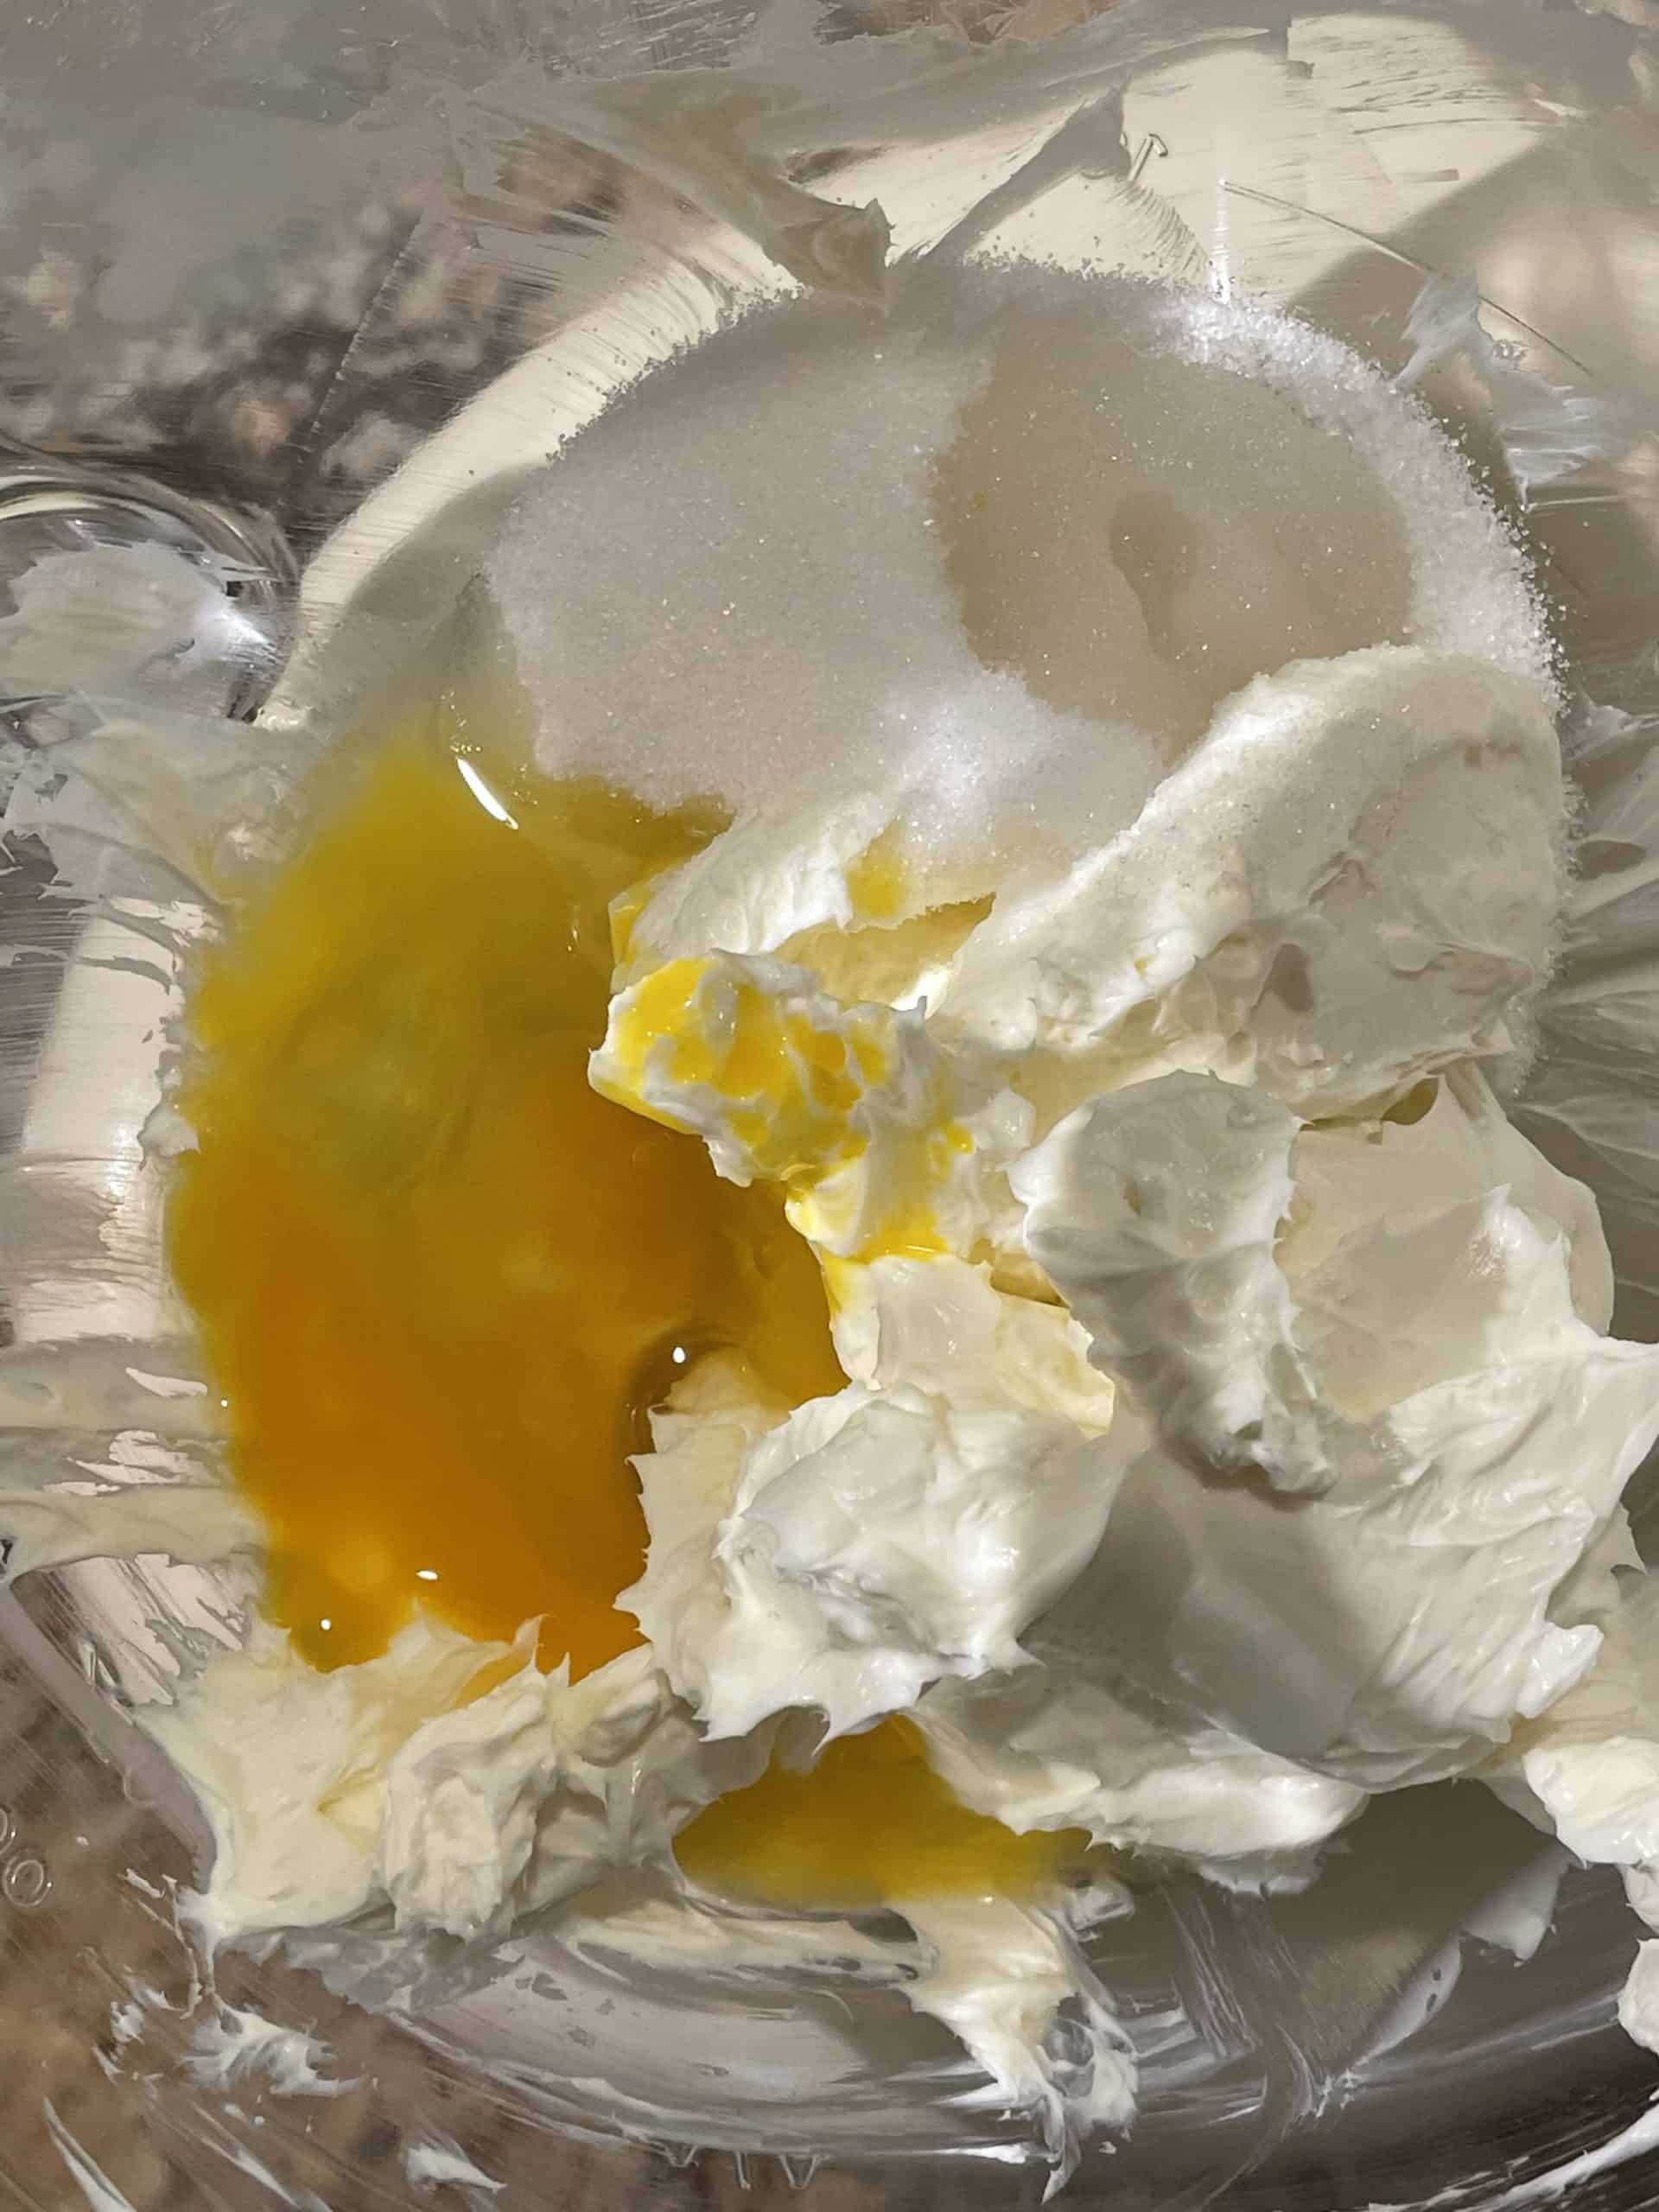 Add the egg, sugar and vanilla to the whipped cream cheese.